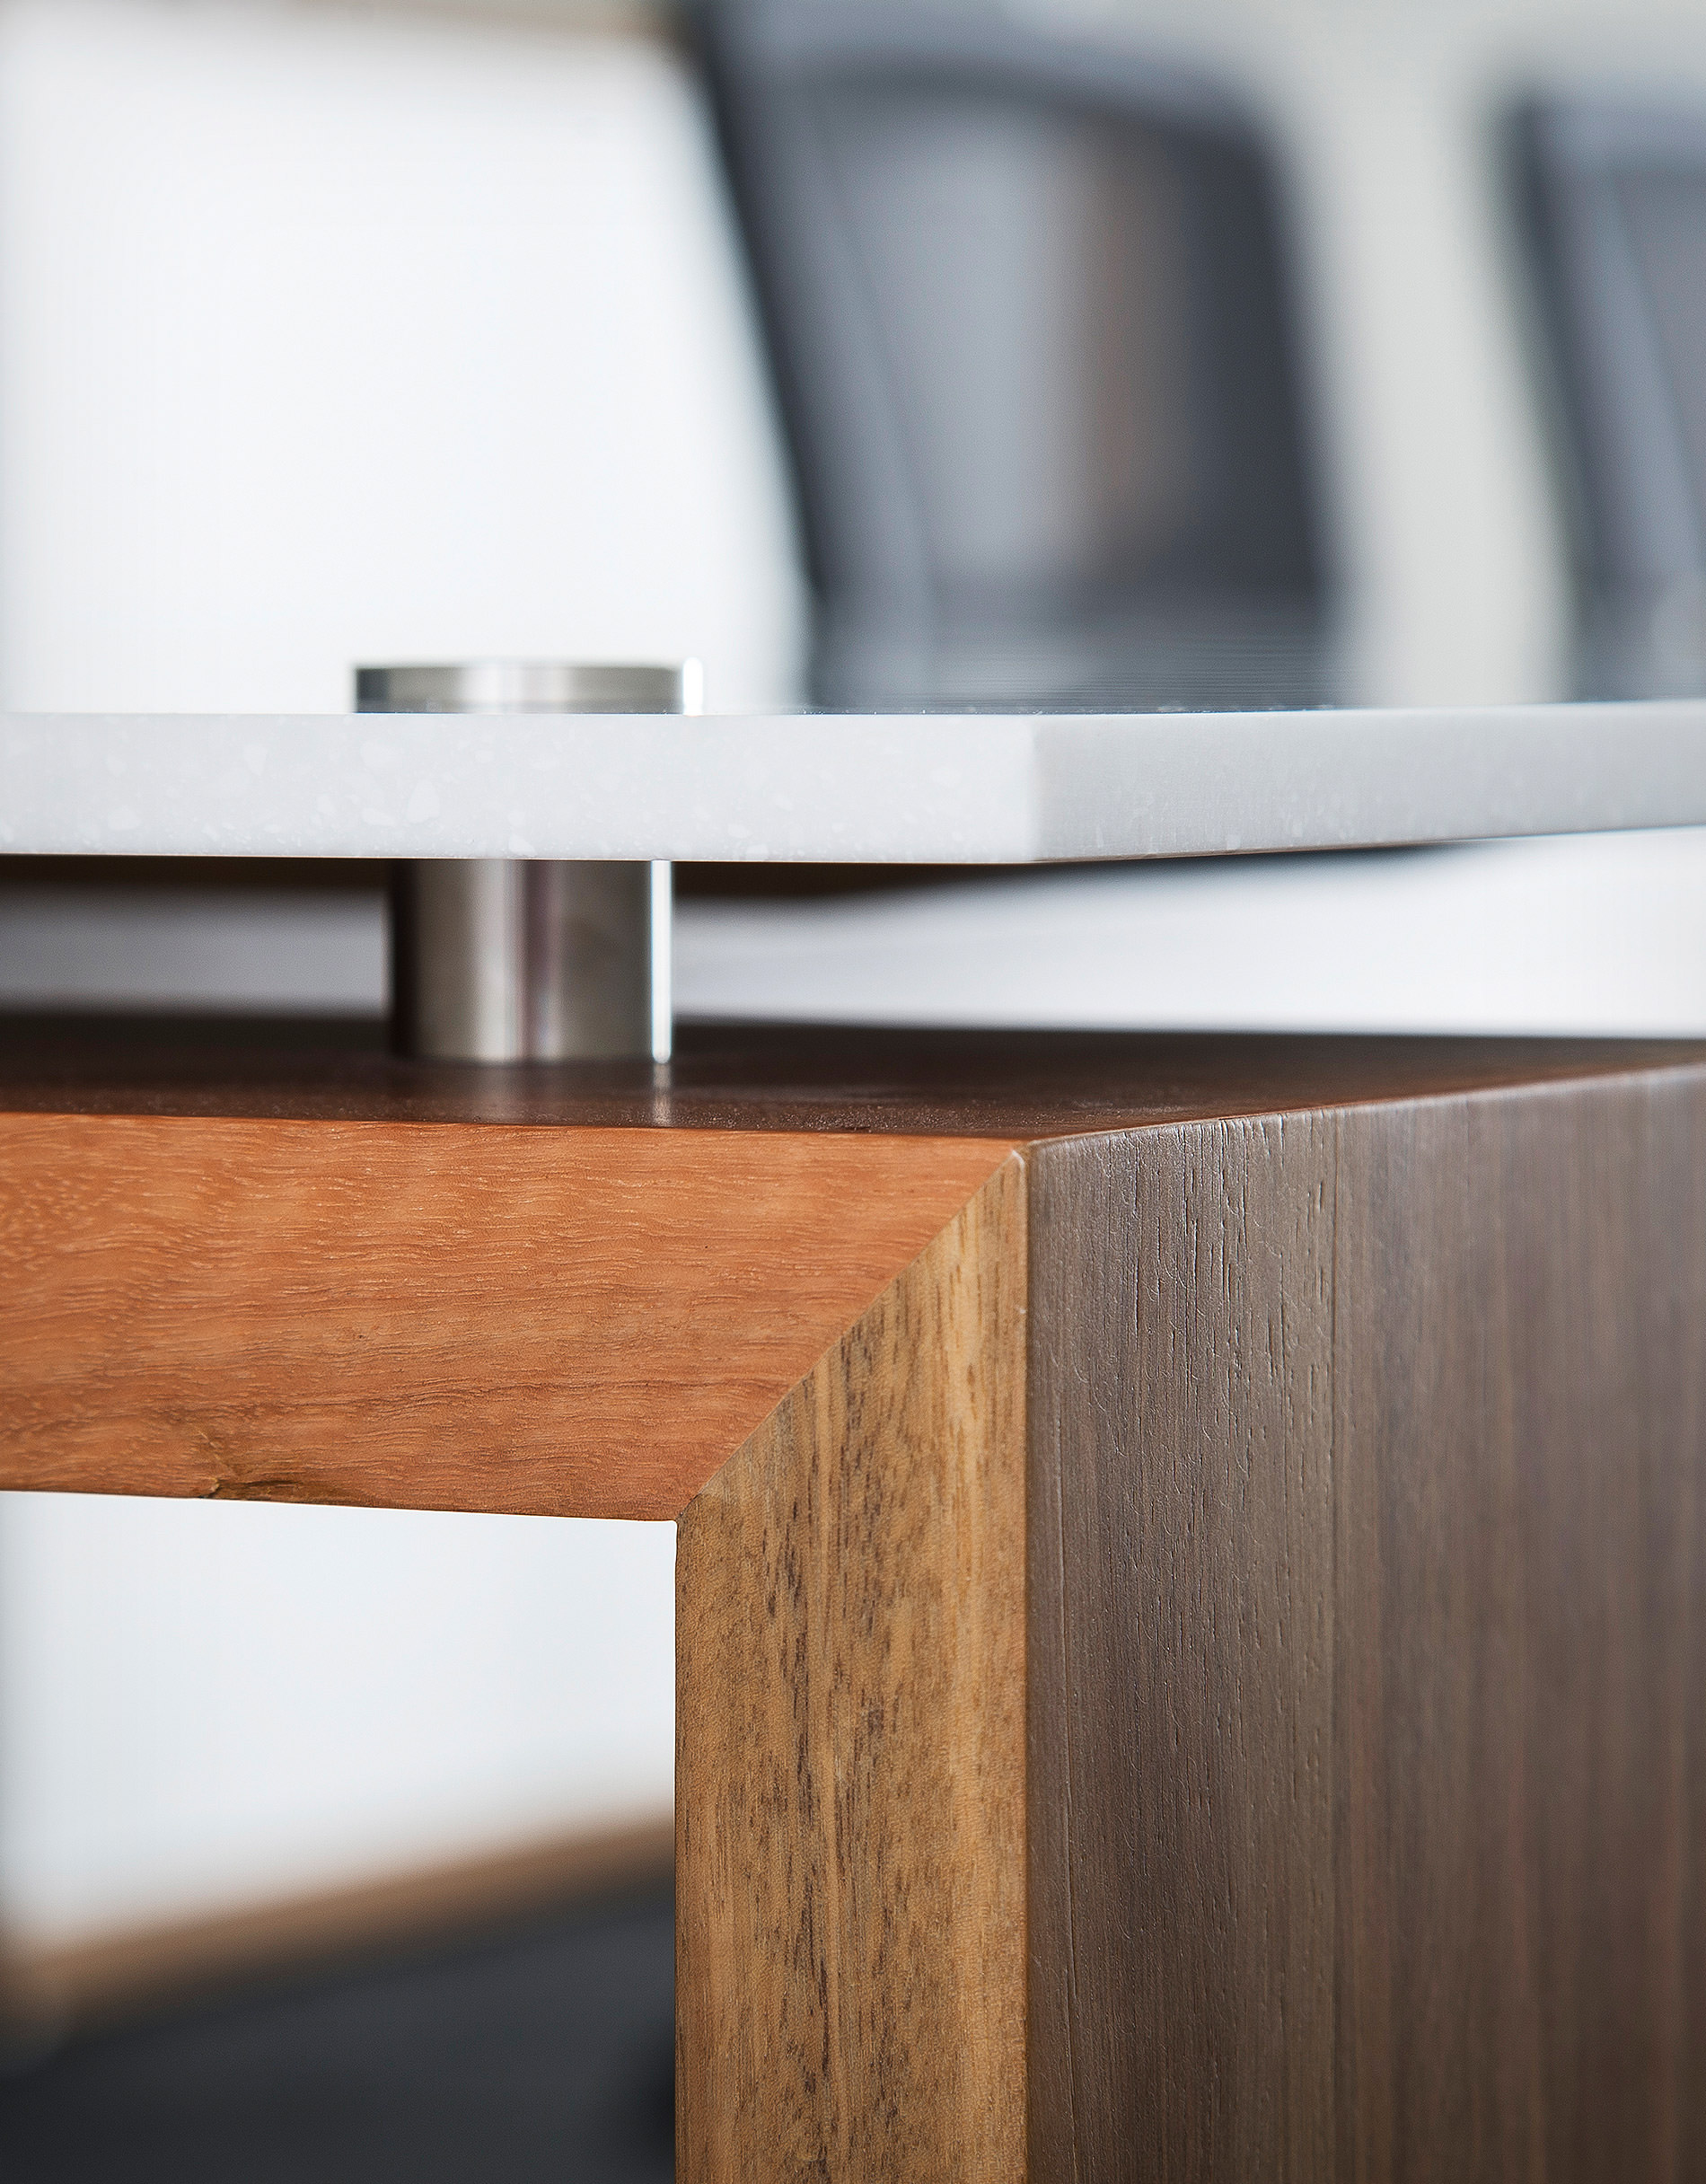 The office sports beautiful detailing in the designer table created by Australian designer FrancoCrea